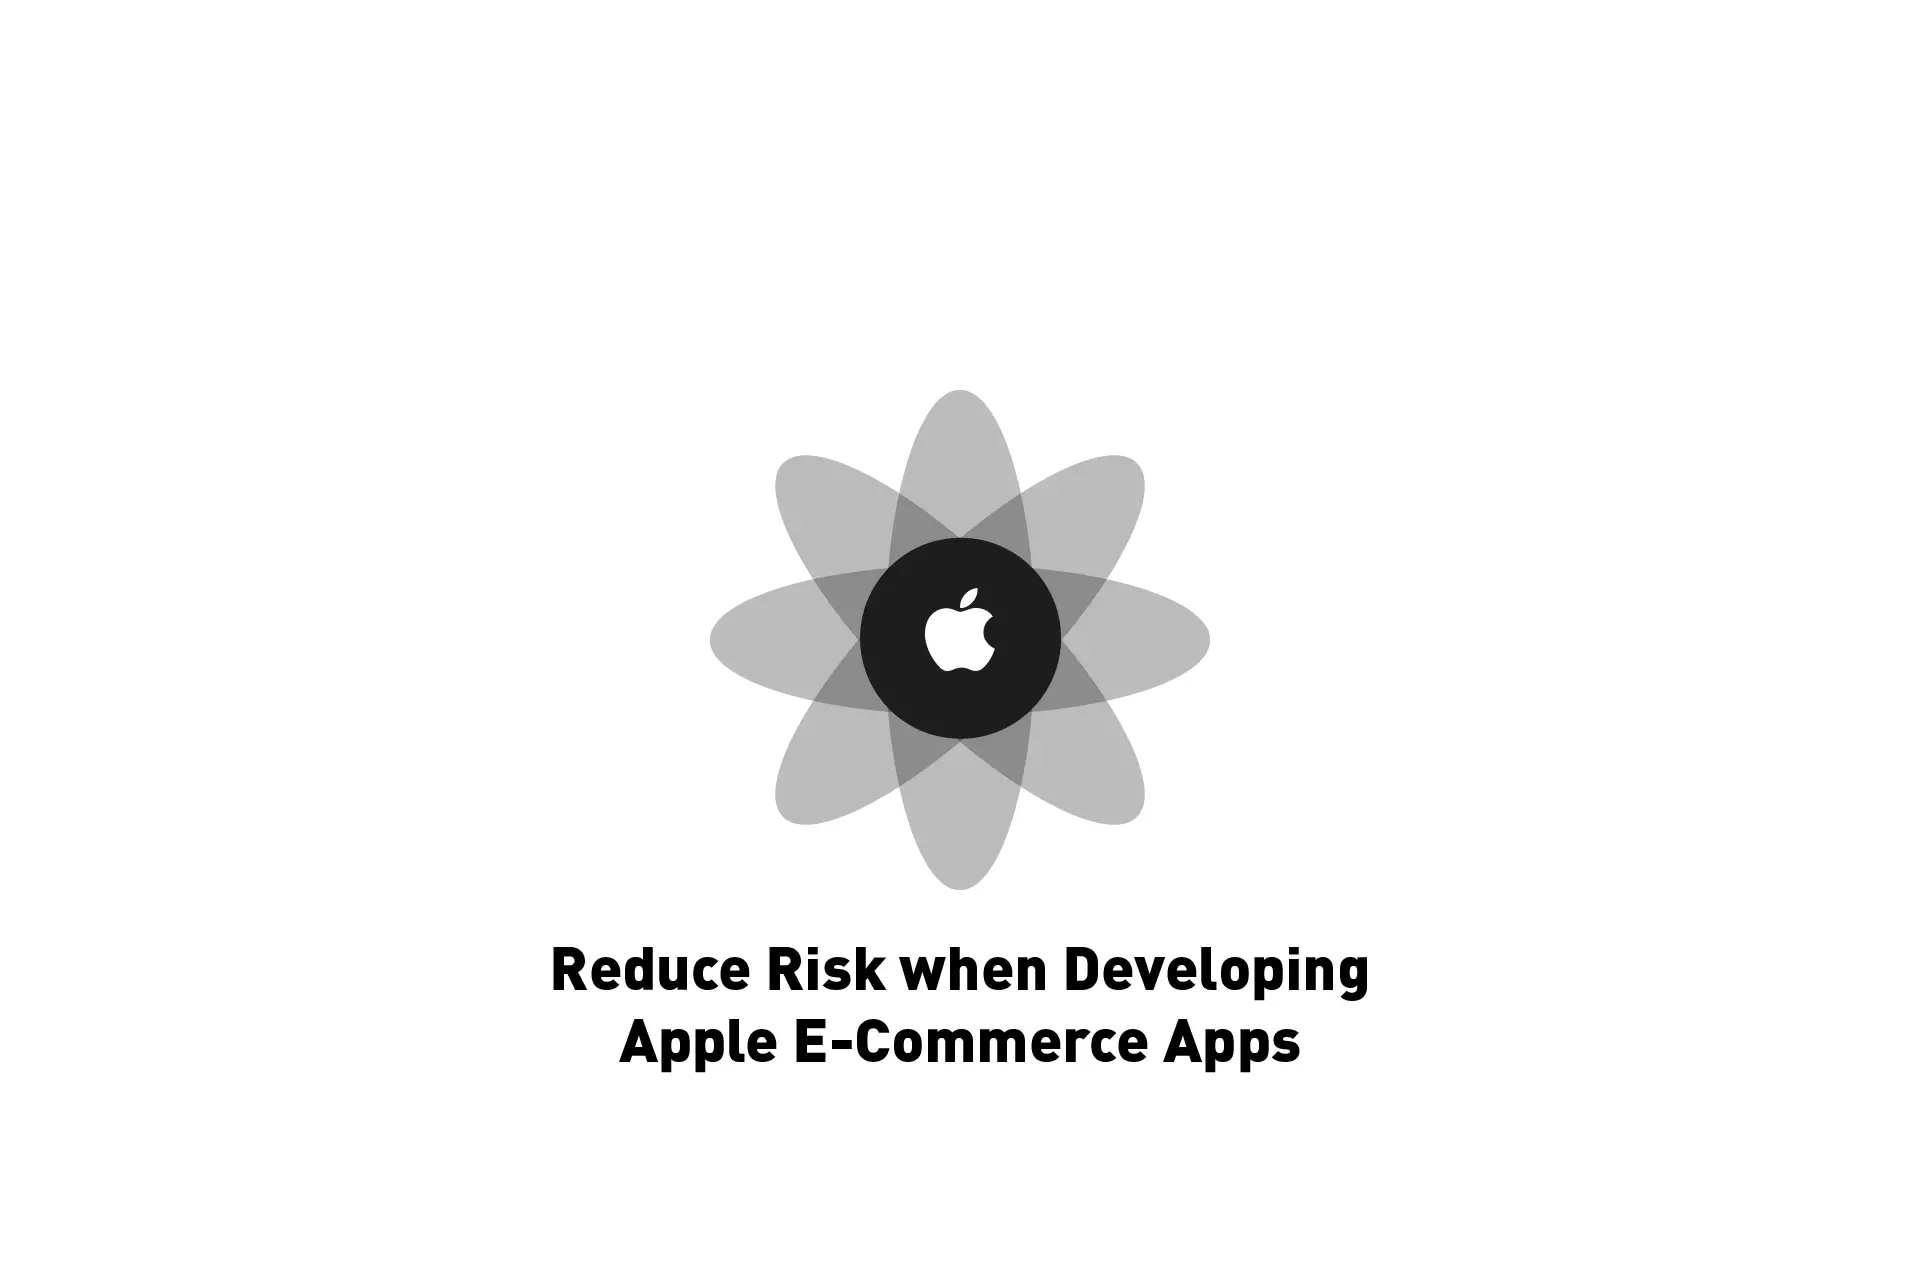 A flower that represents Apple with the text "Reduce Risk when Developing Apple E-Commerce Apps" beneath it.